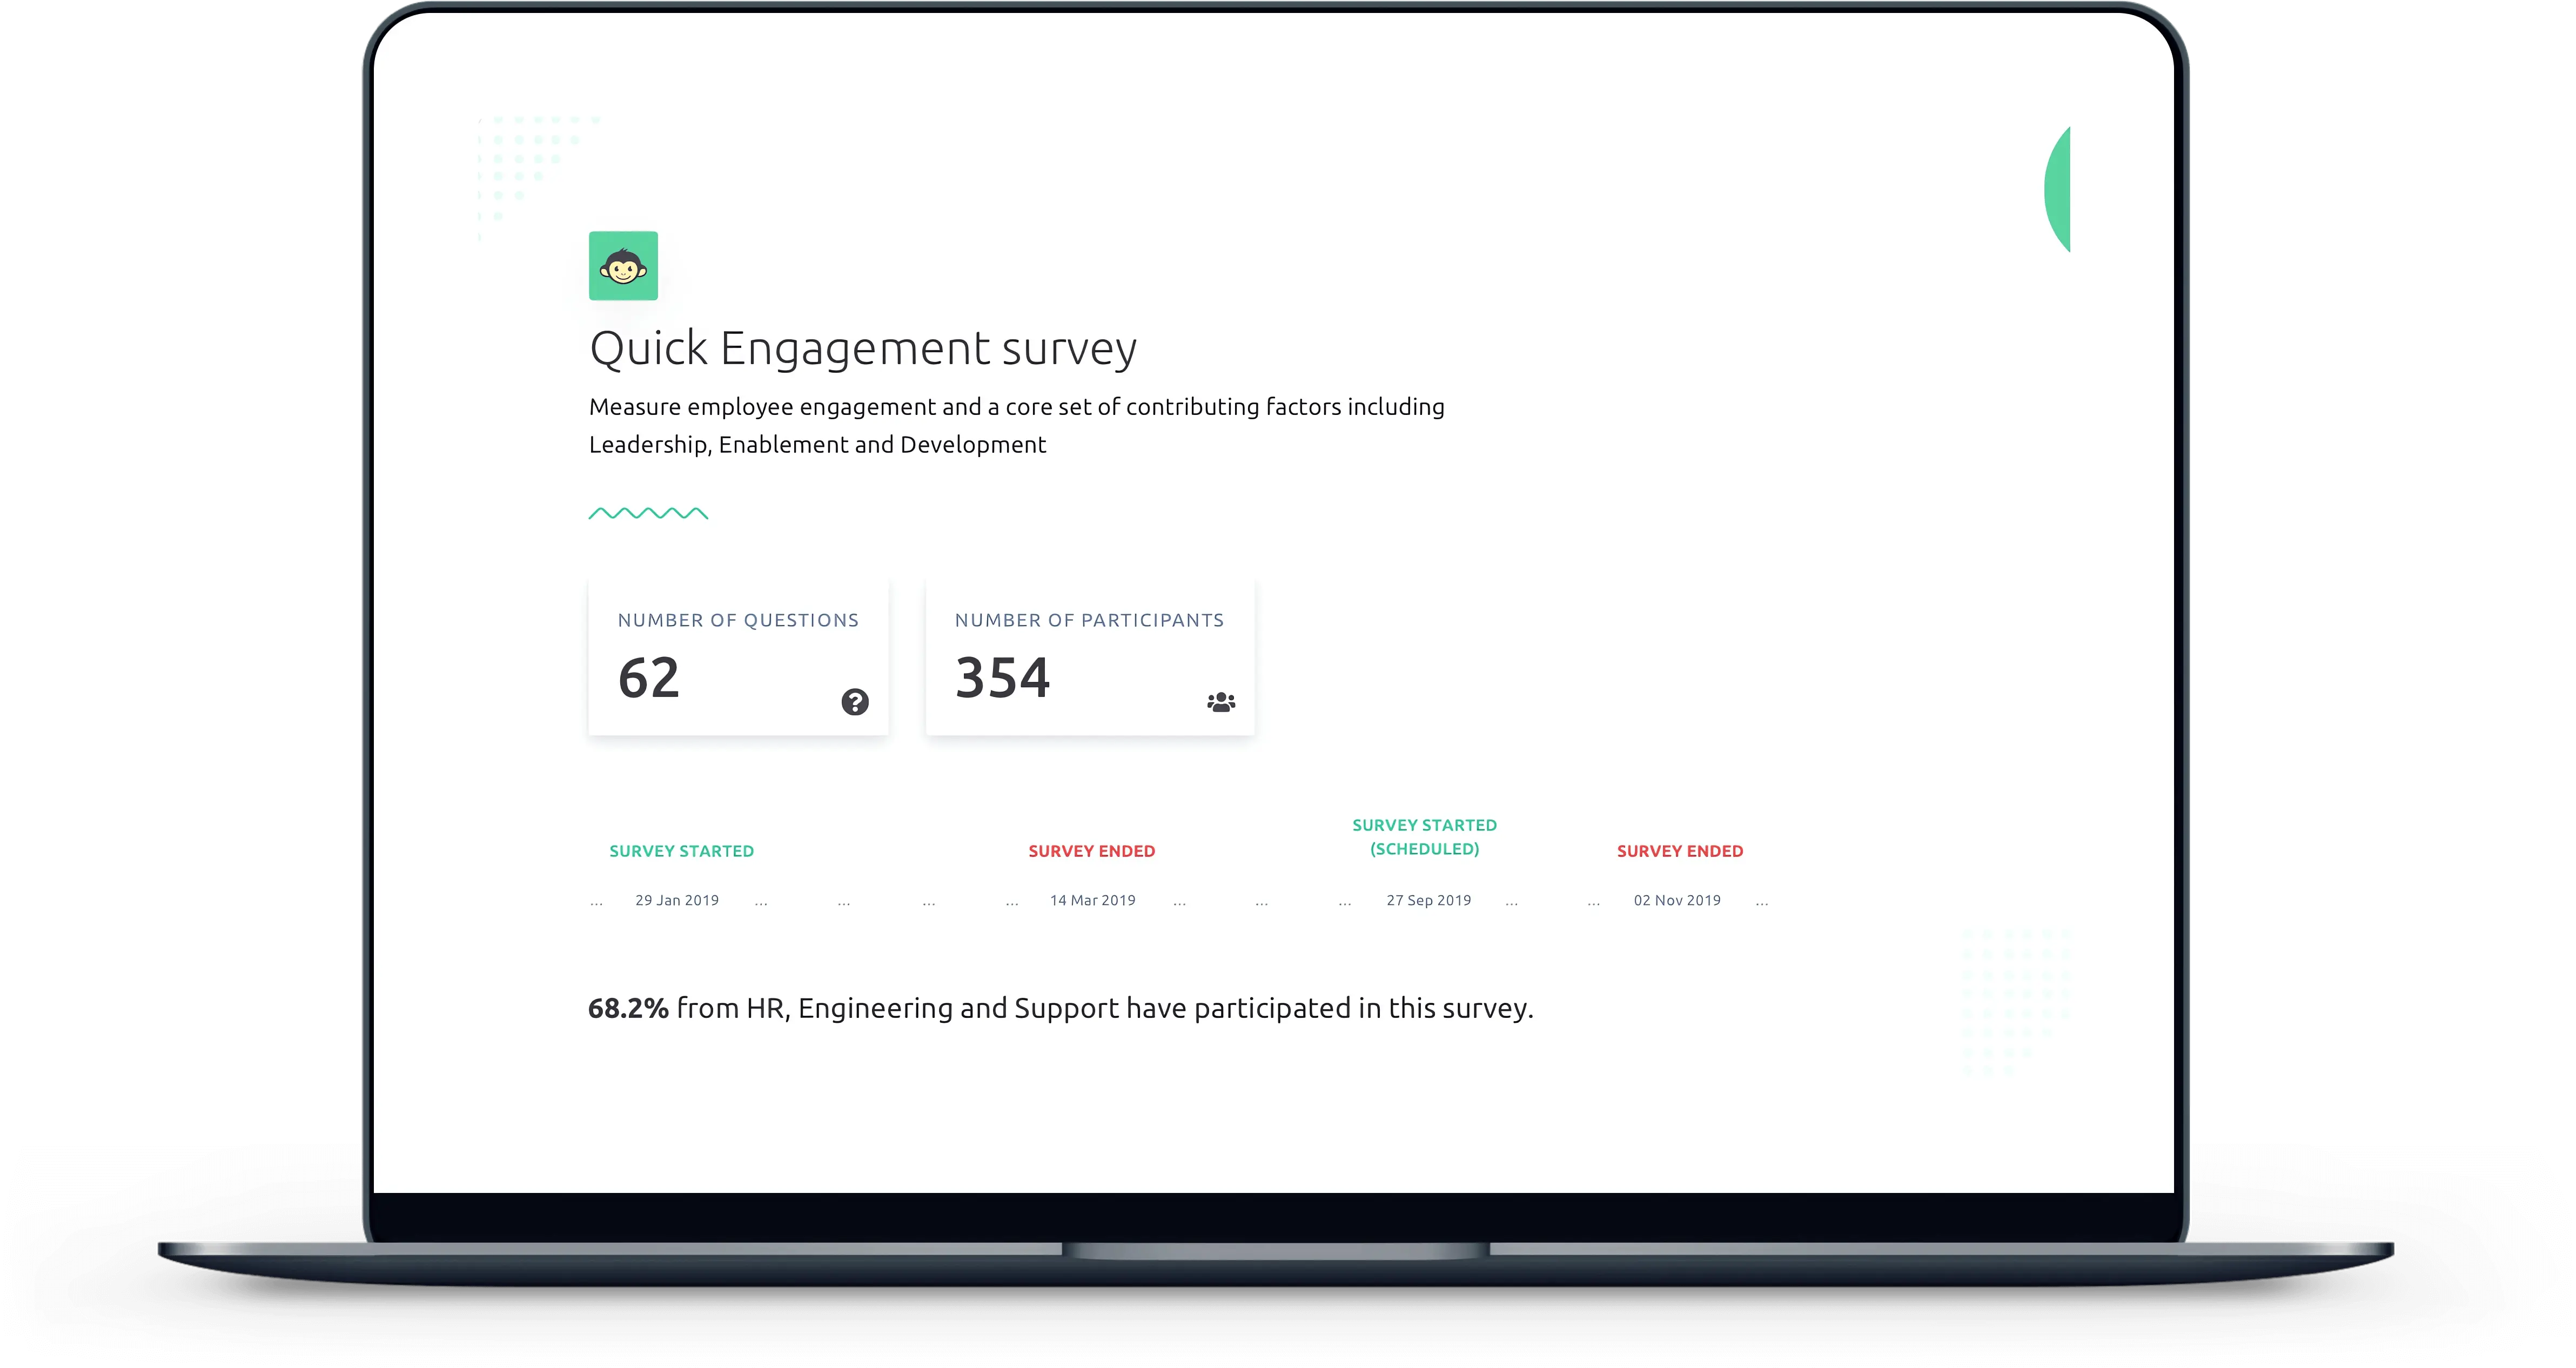 Engagement survey results data's PPT file export in our Employee Engagement Platform